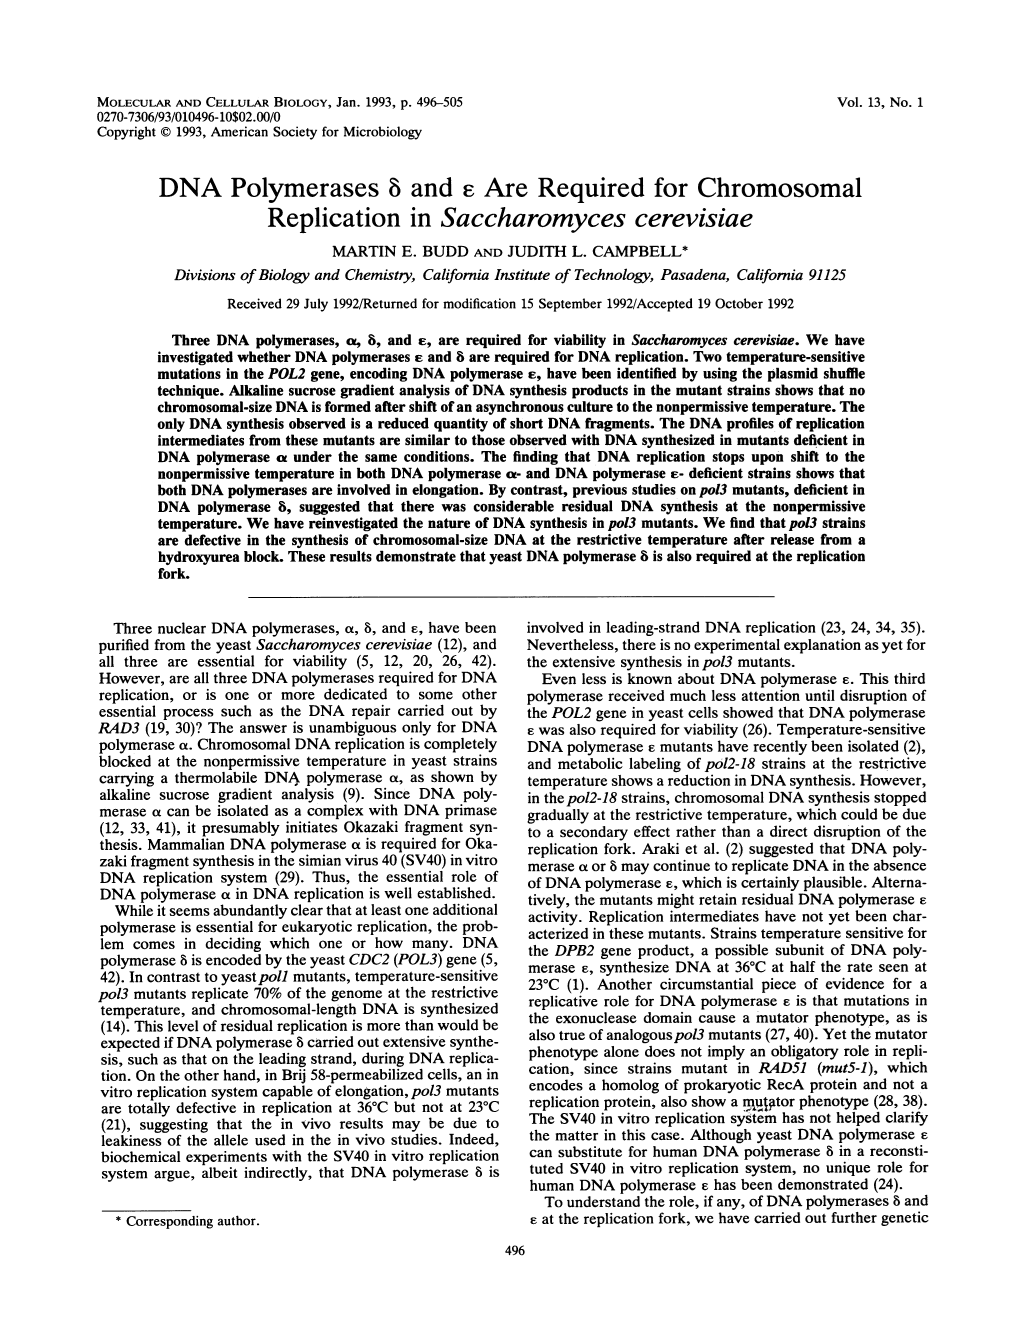 DNA Polymerases 8 and E Are Required for Chromosomal Replication in Saccharomyces Cerevisiae MARTIN E